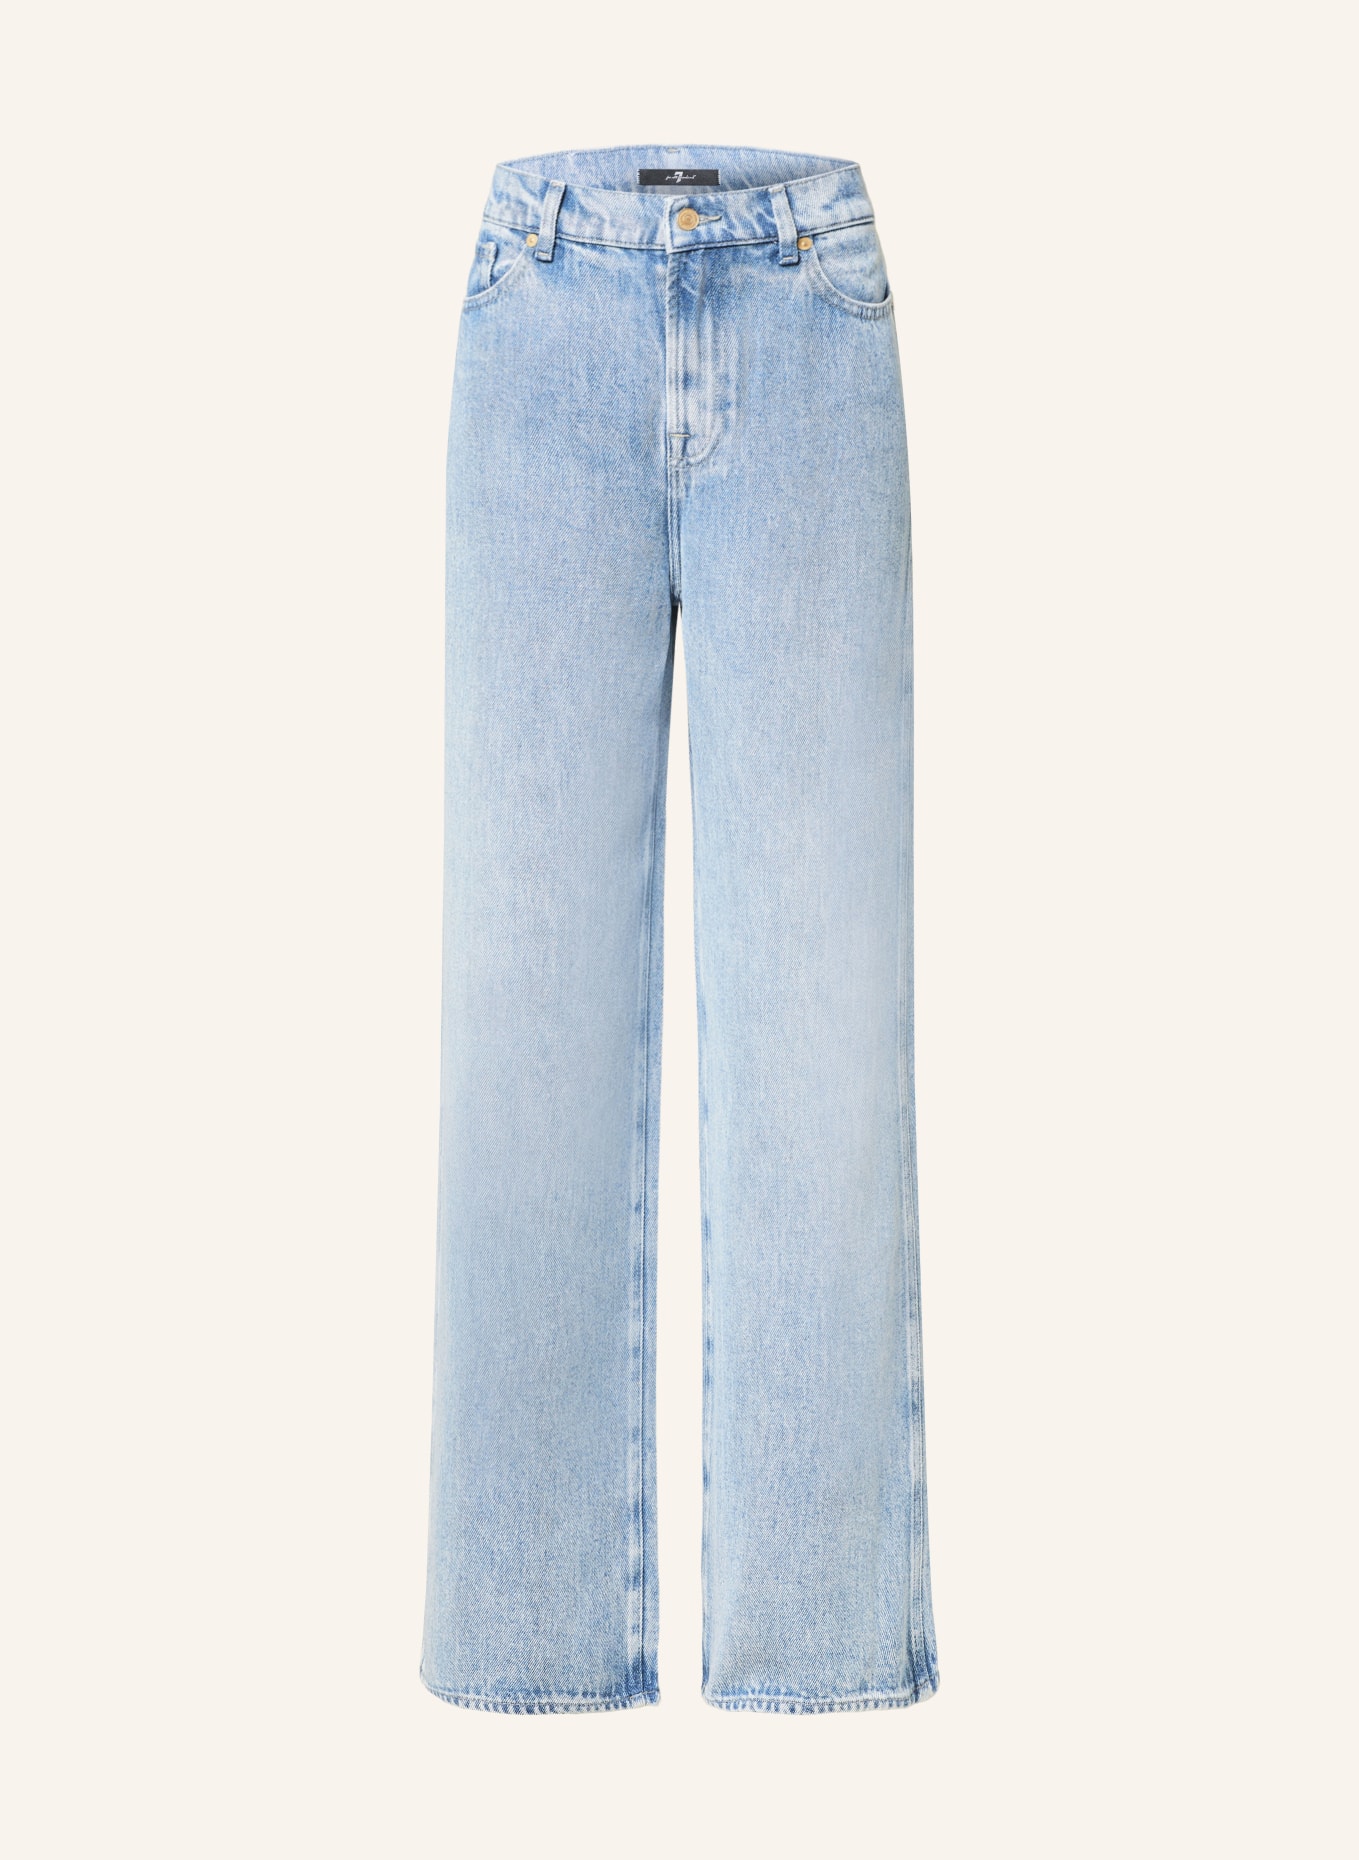 7 for all mankind Straight Jeans SCOUT, Farbe: LIGHT BLUE (Bild 1)